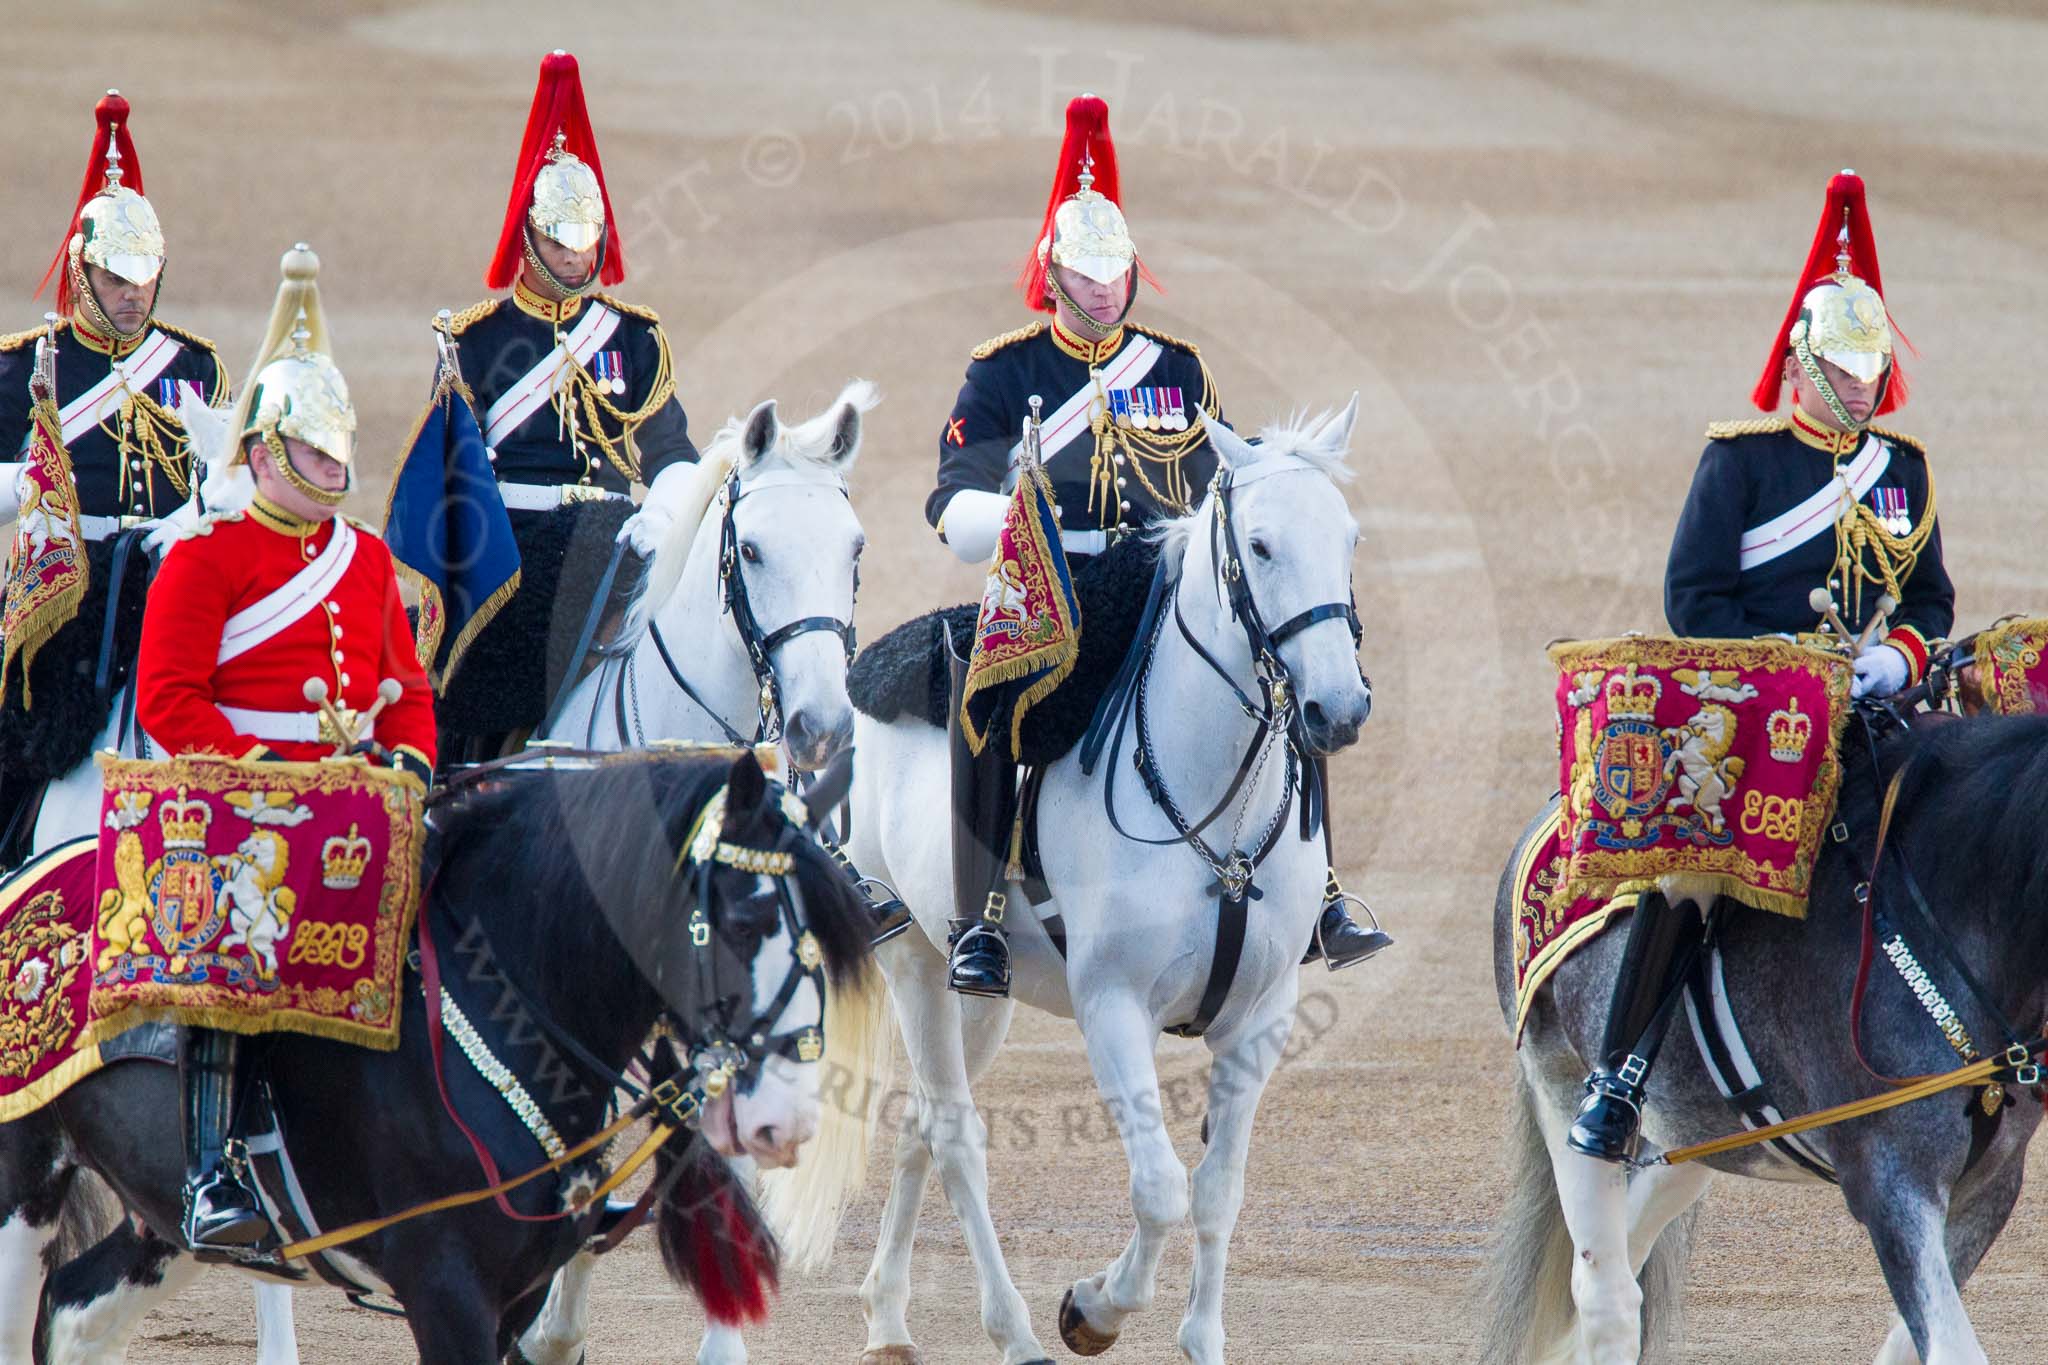 Beating Retreat 2014.
Horse Guards Parade, Westminster,
London SW1A,

United Kingdom,
on 11 June 2014 at 20:17, image #73